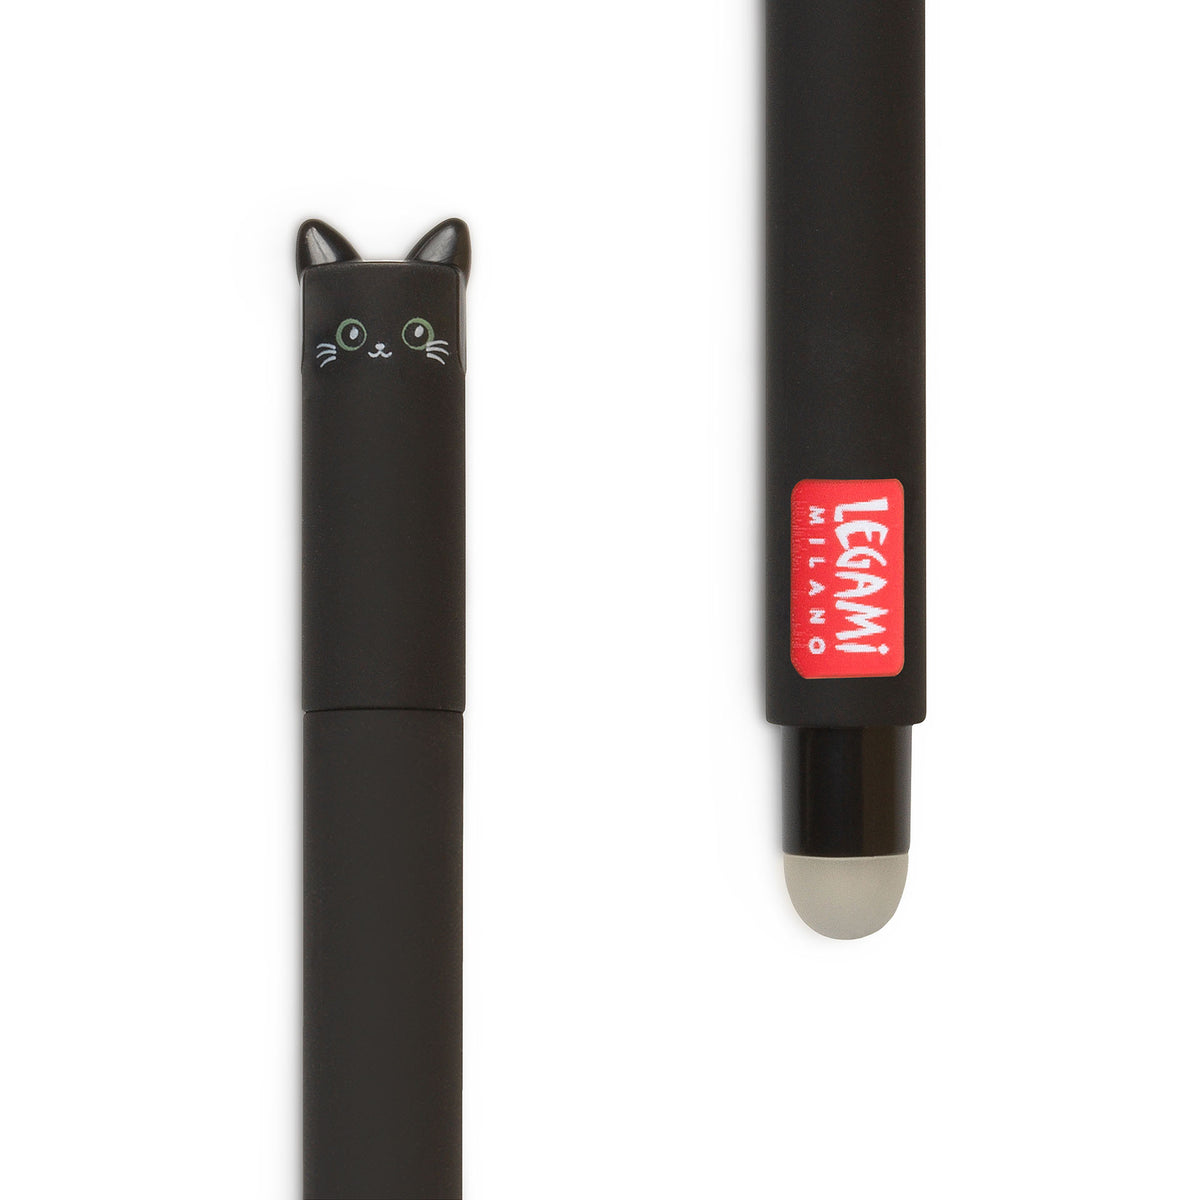 Image of an erasable pen lid and rubber in the shape of a black cat.